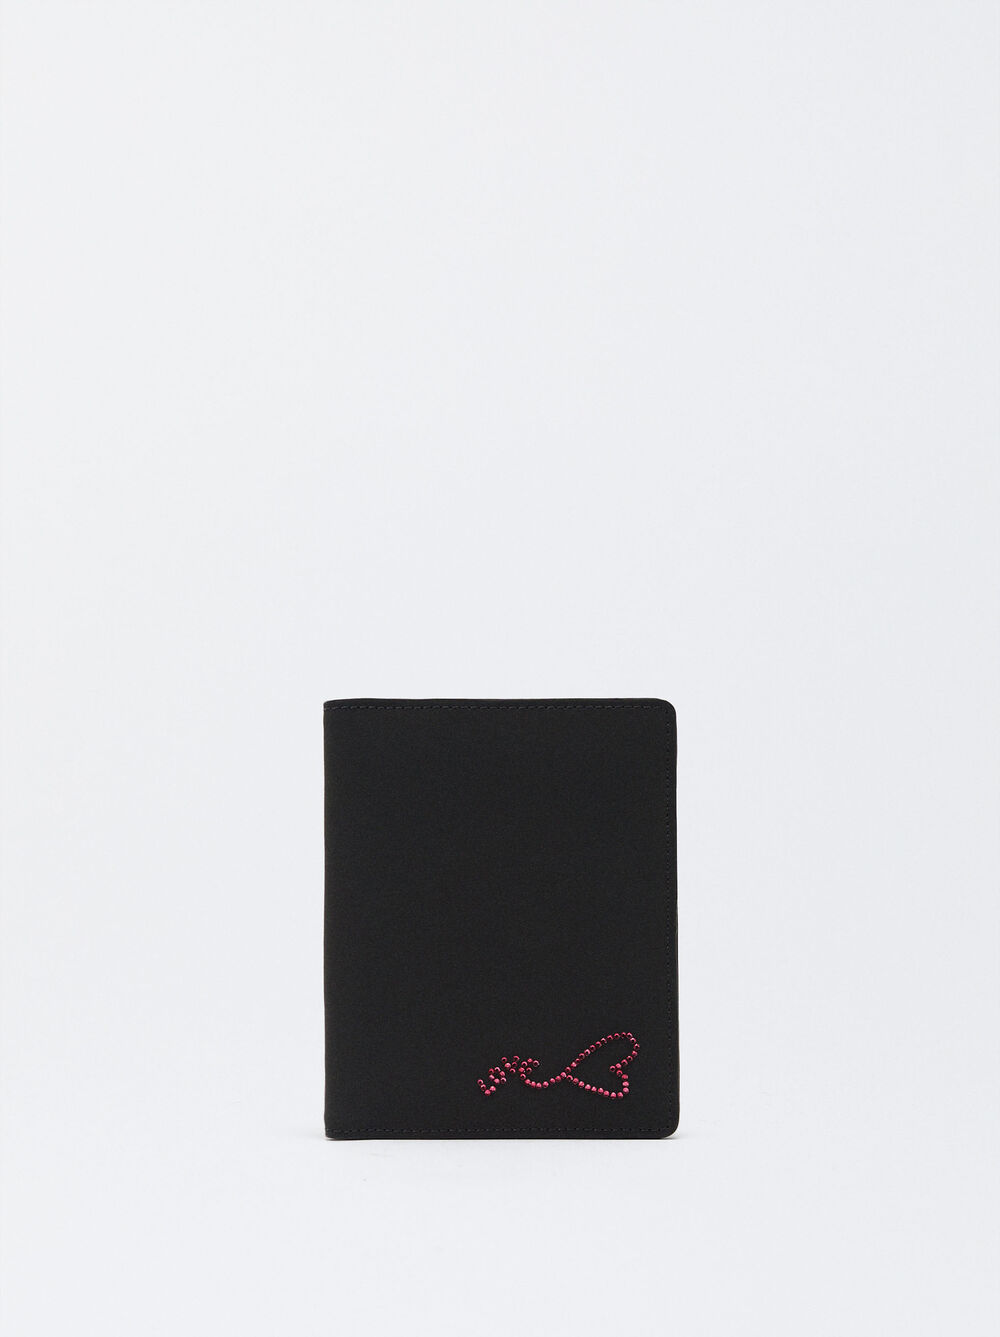 Passport Cover With Heart